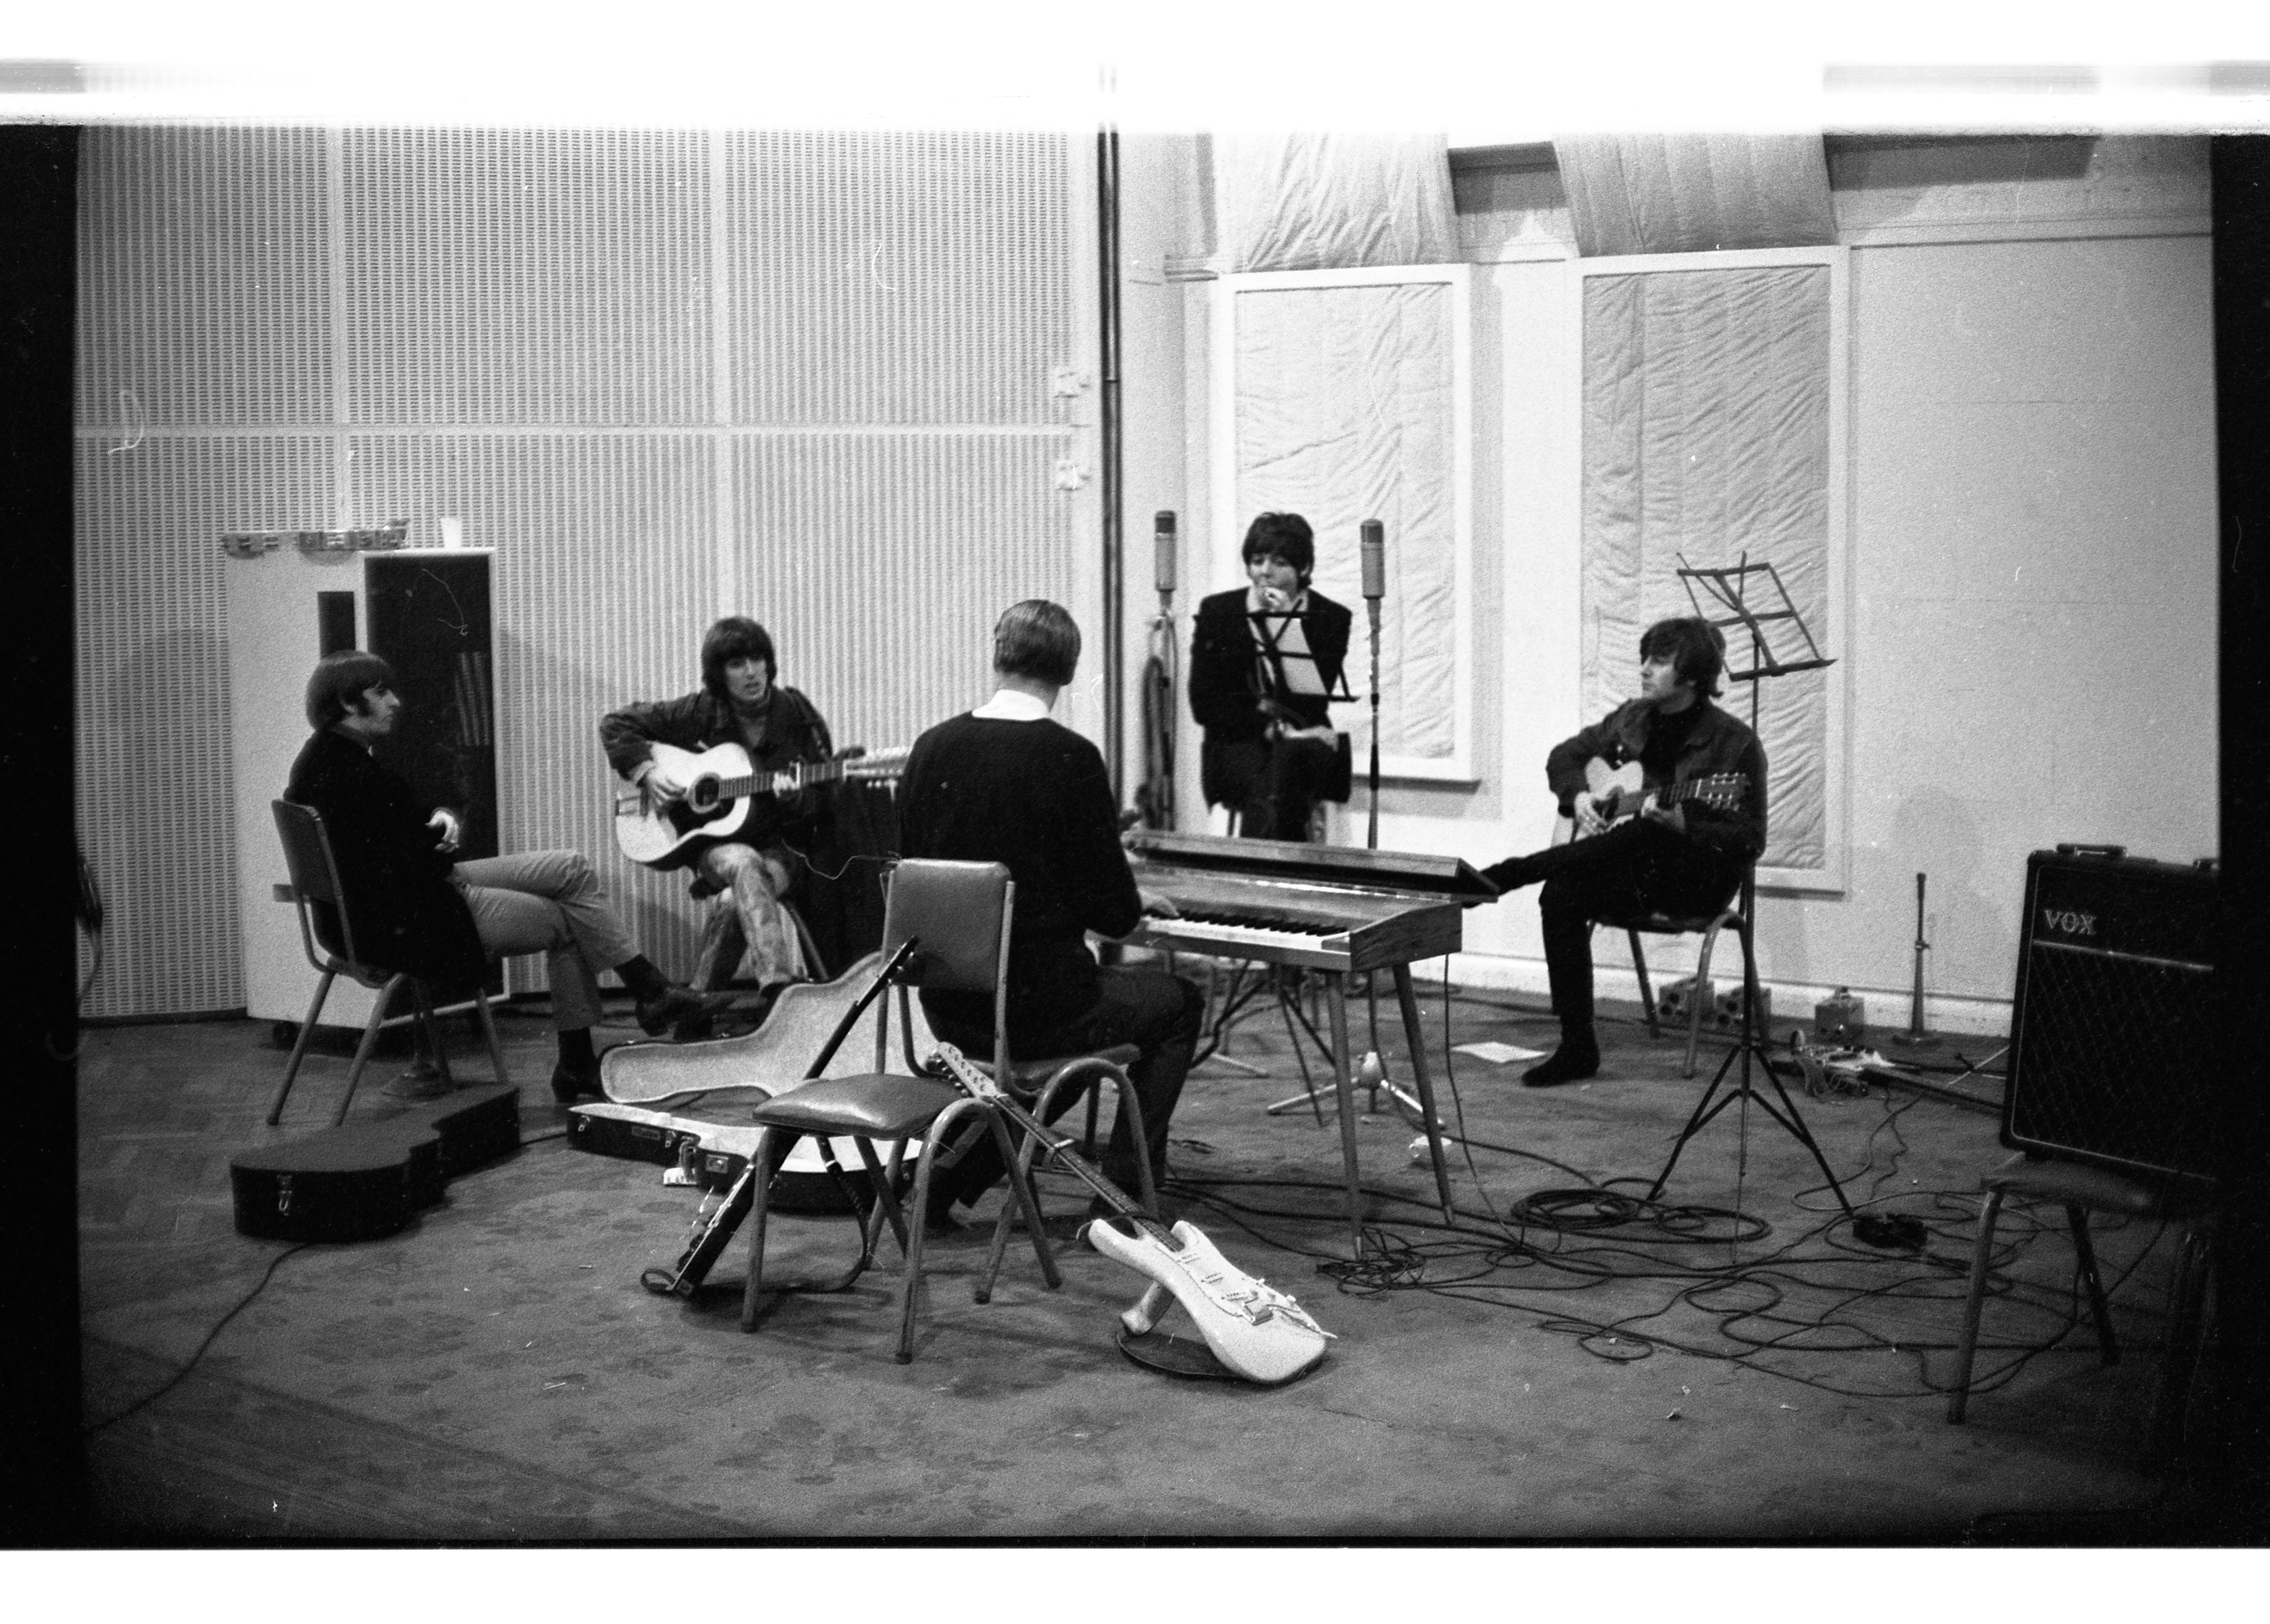 George Harrison playing the guitar during a Beatles studio session